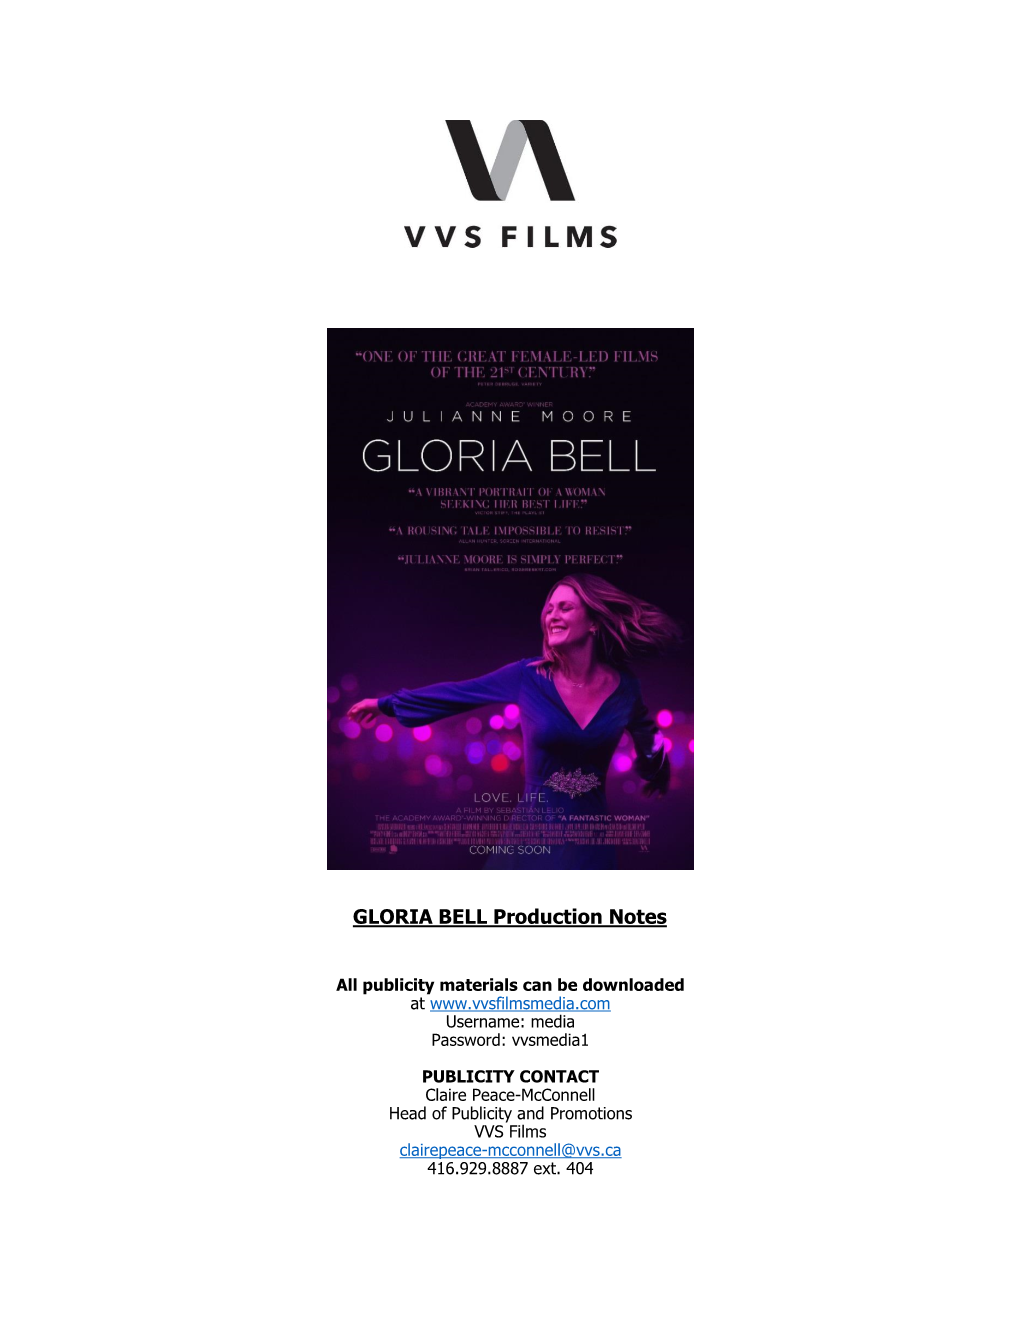 GLORIA BELL Production Notes